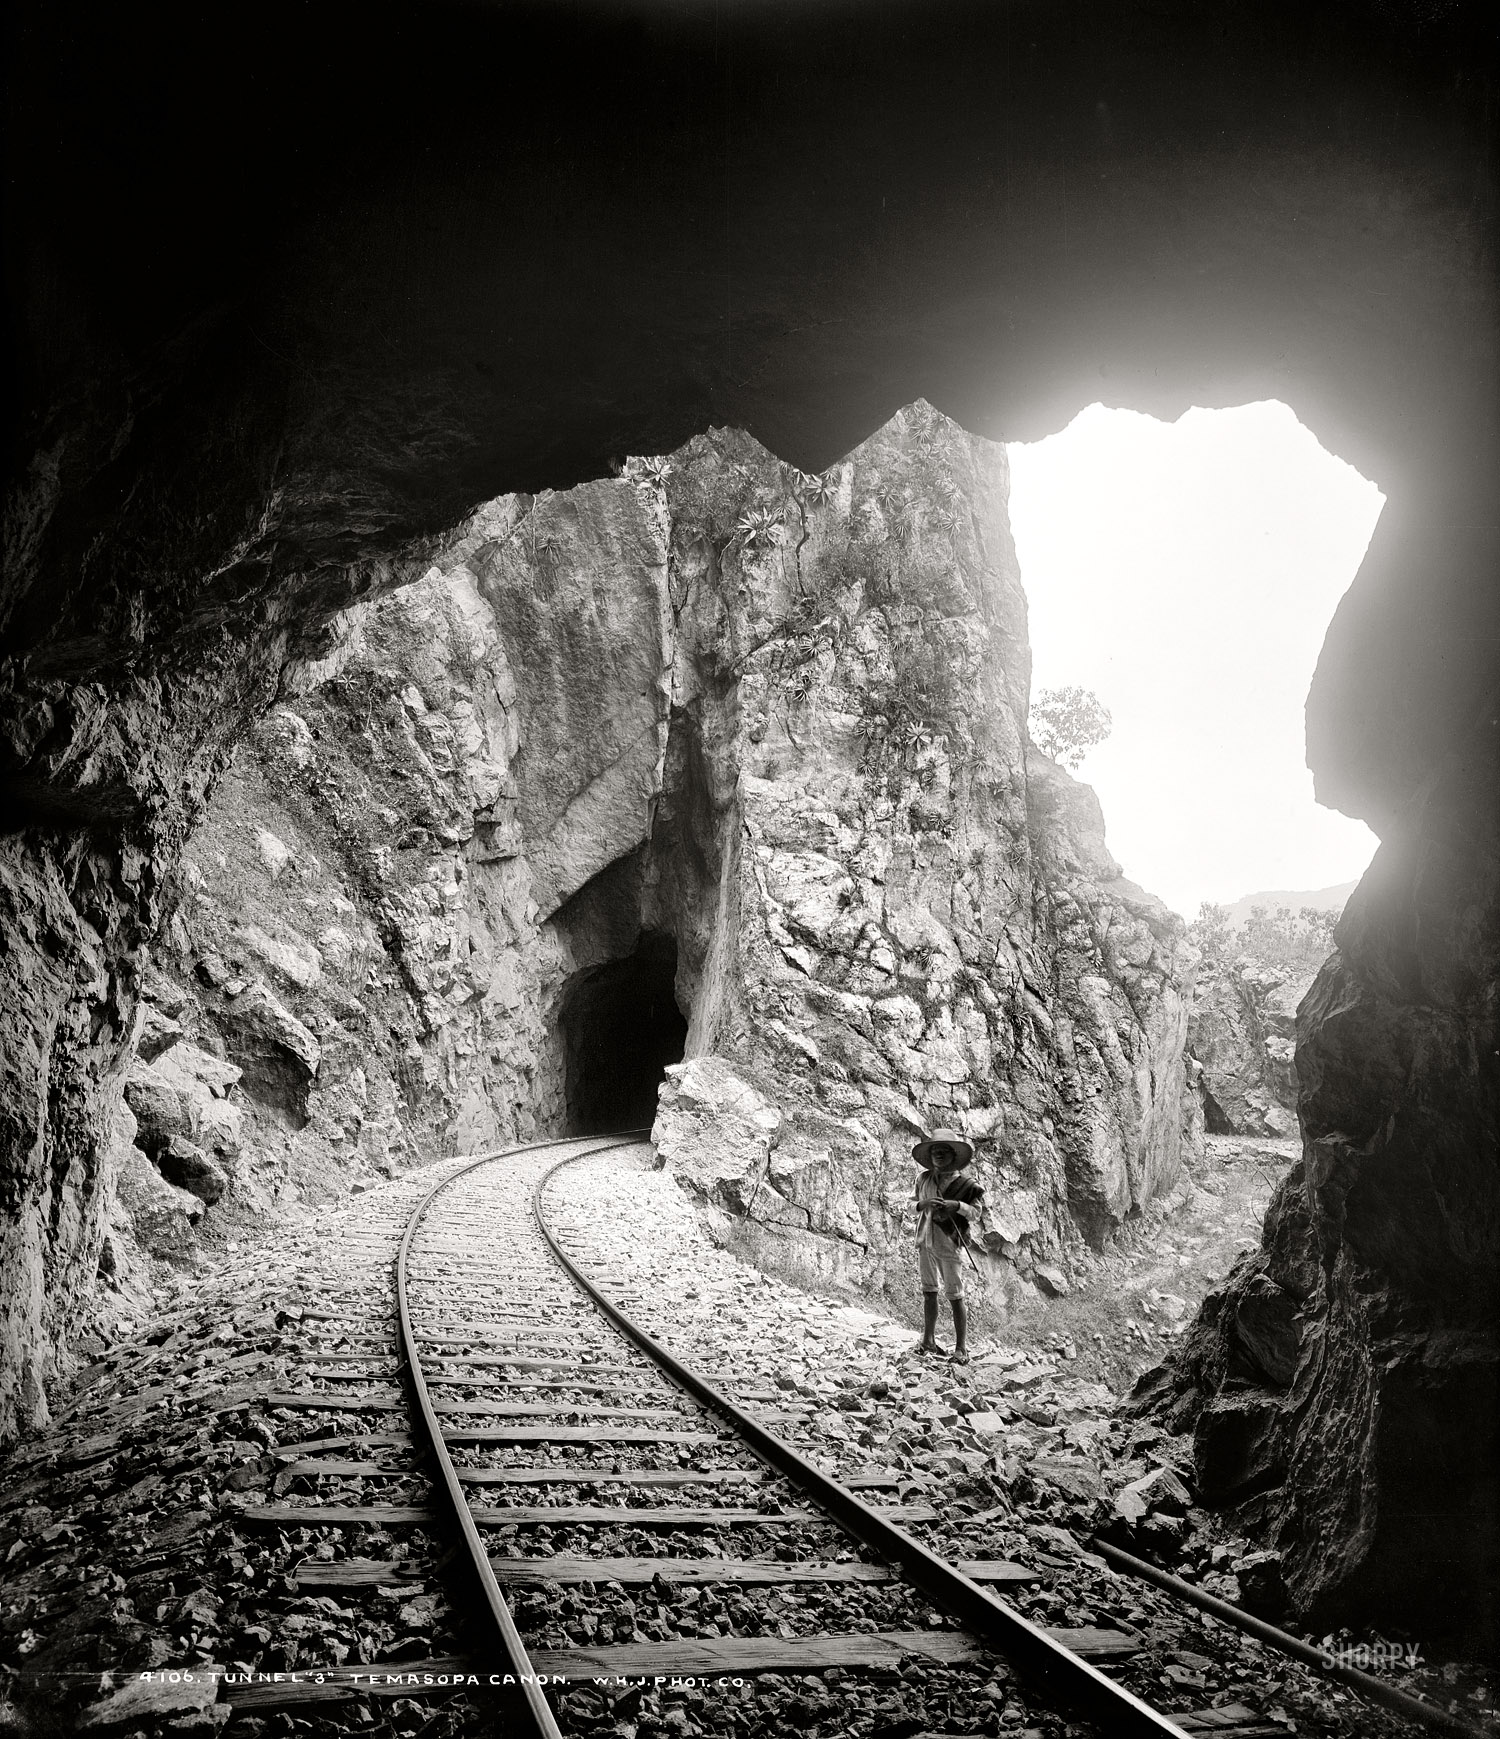 San Luis Potosi, Mexico, 1890s. "Tunnel 3, Tamasopo Canyon." Dry plate glass negative by William Henry Jackson, Detroit Publishing Co. View full size.